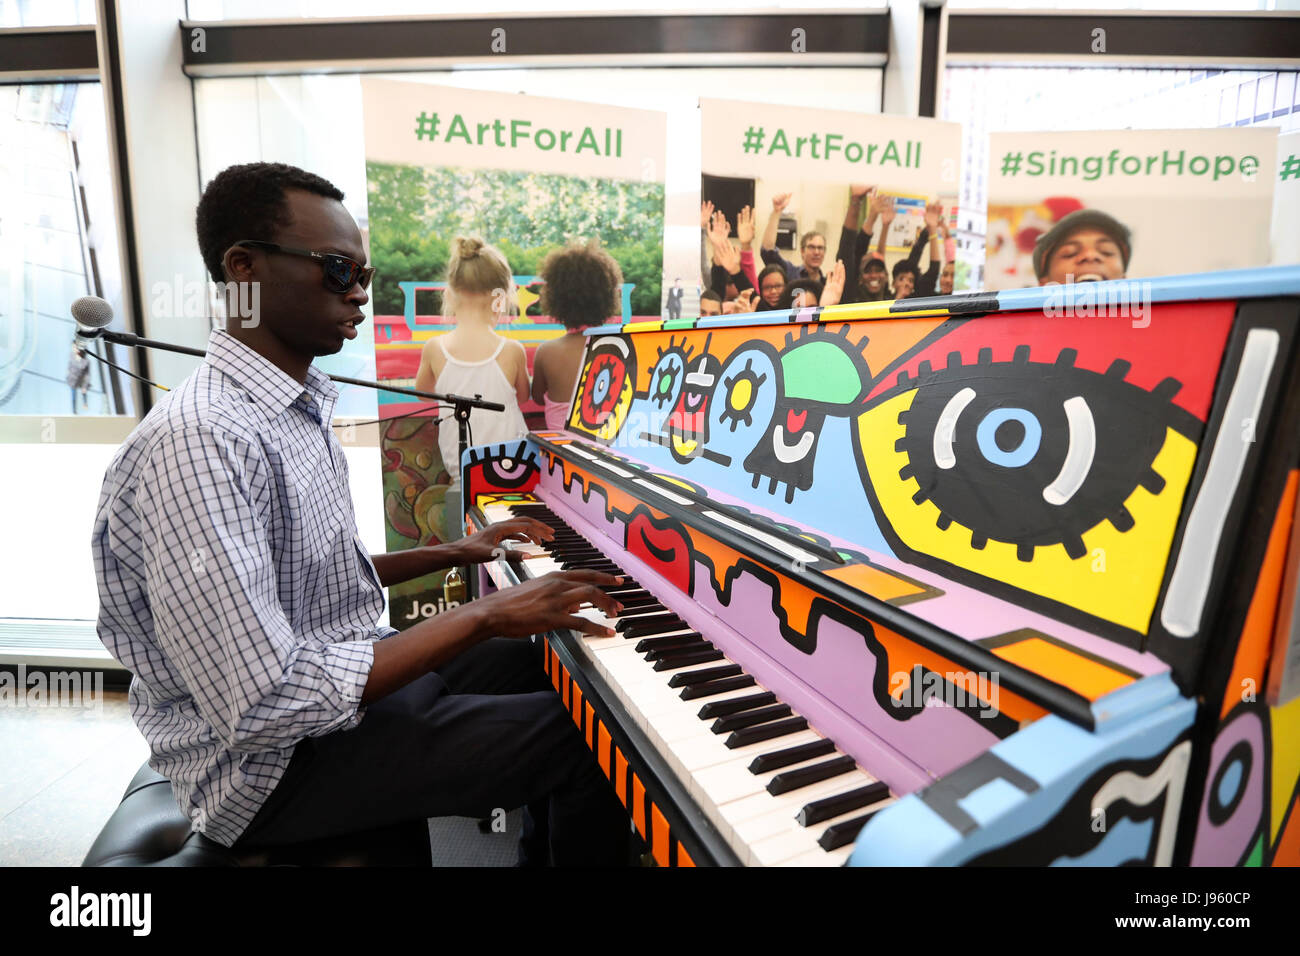 (170605) -- NEW YORK, June 5, 2017 (Xinhua) -- Keer Deng, a visually disabled hobbyist, plays the piano during the opening event of Sing for Hope Pianos in New York, the United States, on June 5, 2017. Sing for Hope Pianos, an annual public arts project in New York, kicked off here on Monday. From June 5 to June 25, as a celebration of the work Sing for Hope does in communities year-round, 60 Sing for Hope Pianos will be placed in parks and public spaces in high traffic locations across all five boroughs in New York for everyone to play. After the public installation concludes on June 25, 50 o Stock Photo